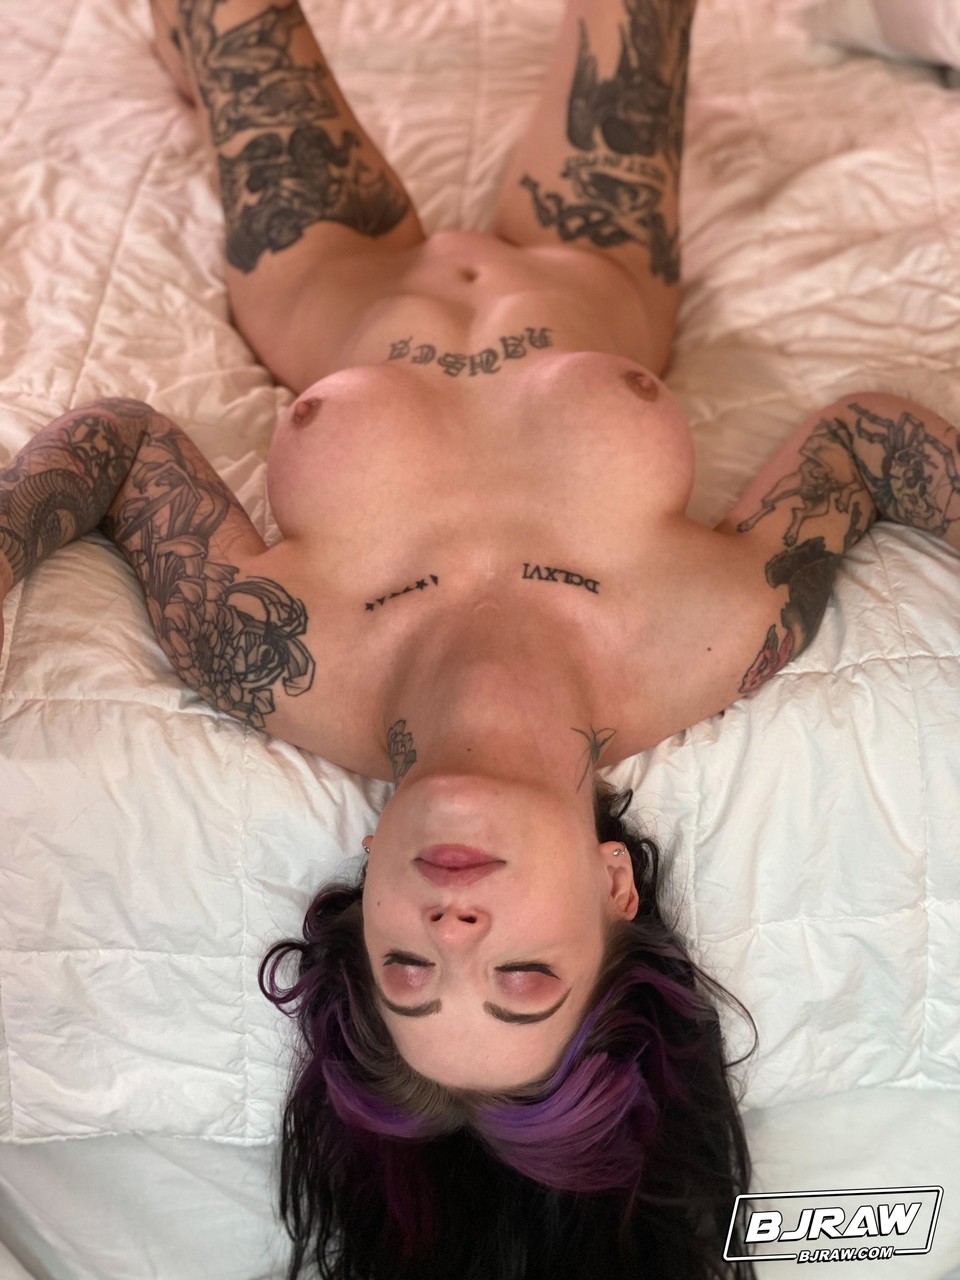 Brunette babe with tattoos Charlotte Sartre takes a dick in her mouth ポルノ写真 #424649935 | BJ Raw Pics, Charlotte Sartre, Tattoo, モバイルポルノ